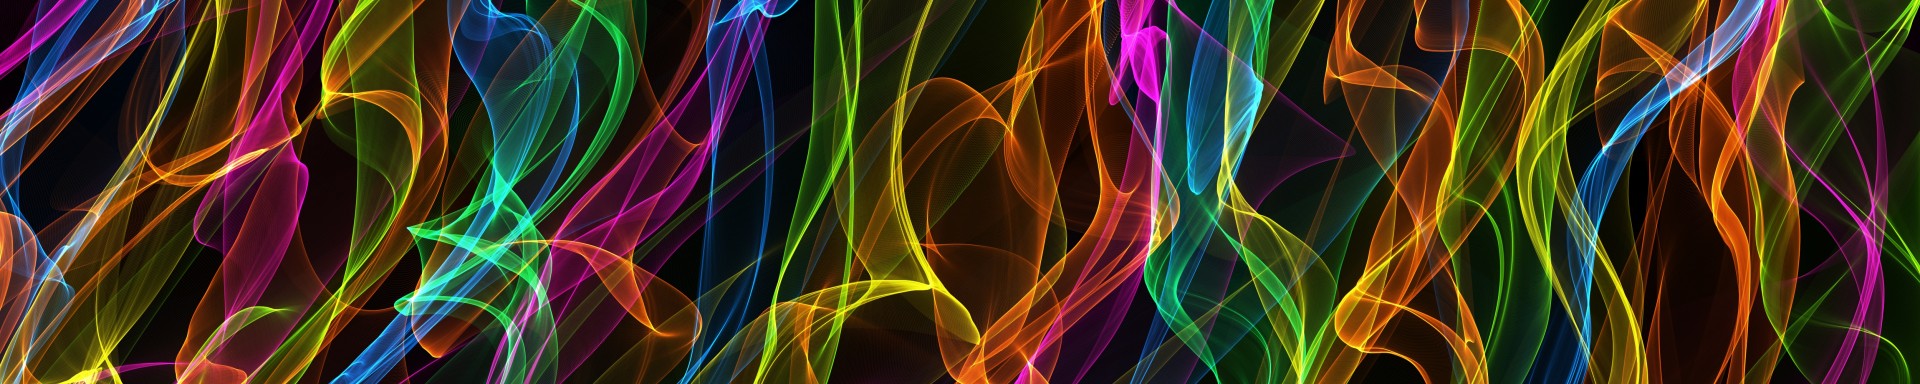 Digitally created abstract page banner. Just add text.